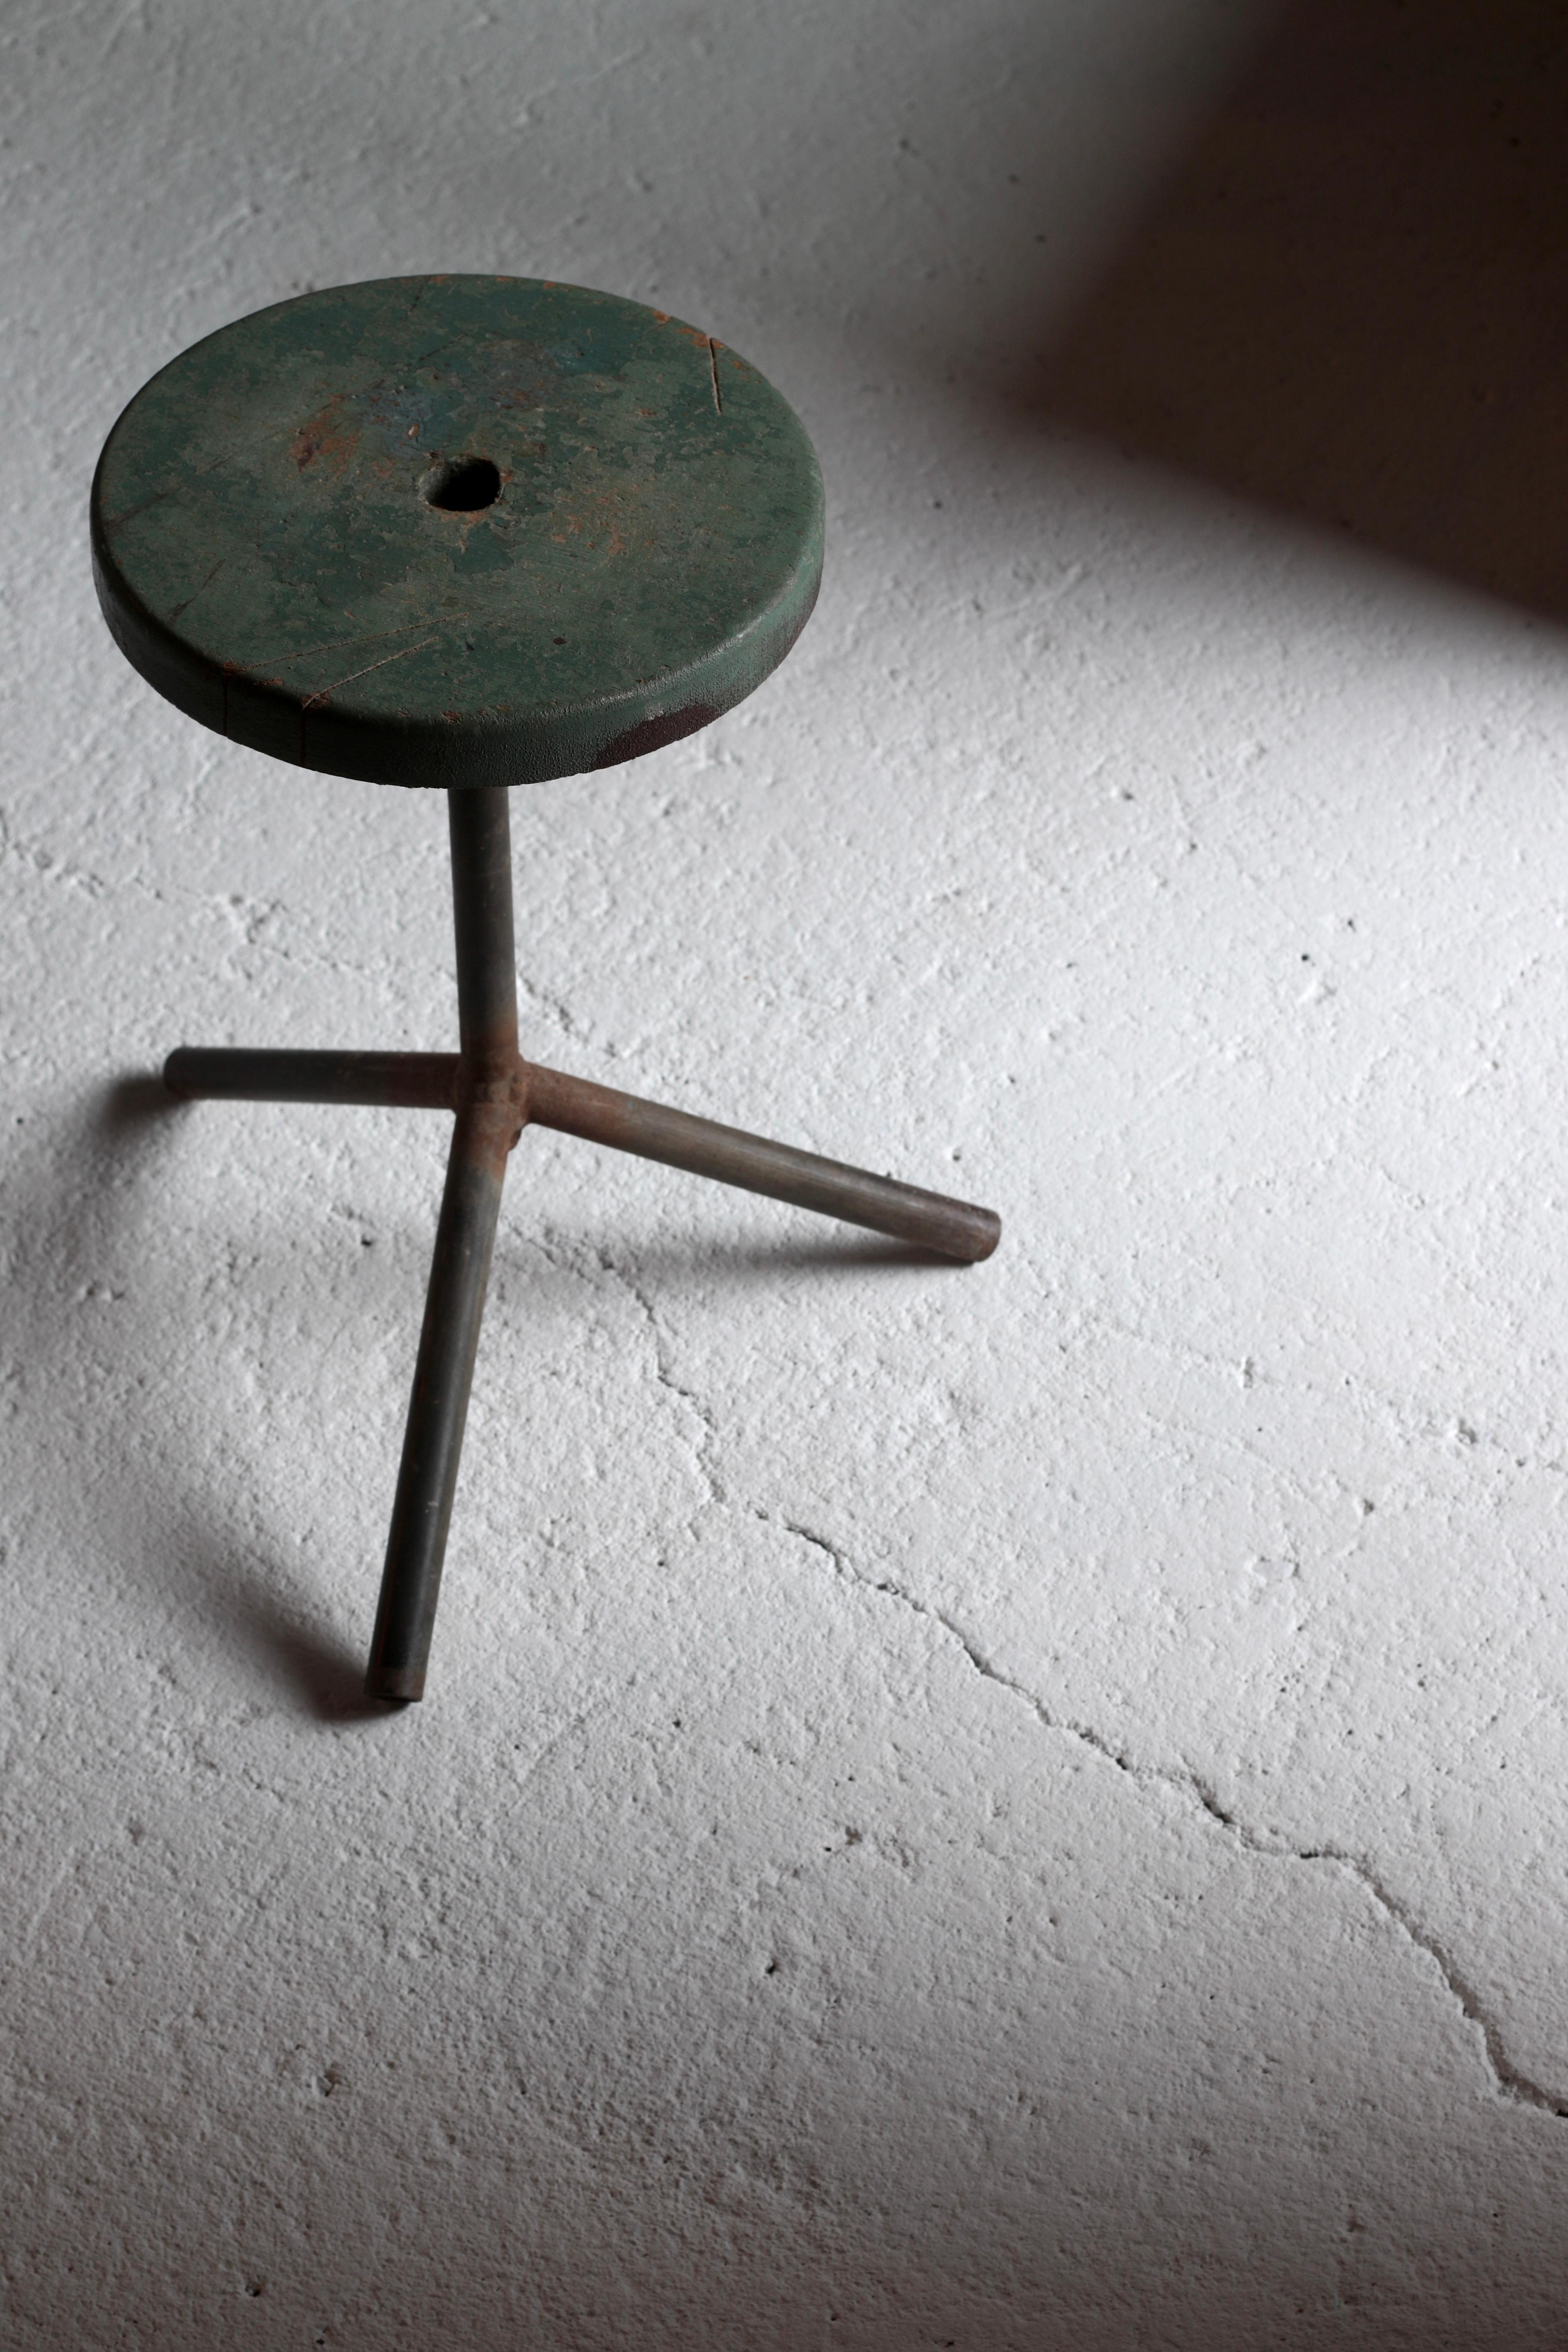 It's an old Japanese swivel chair.

It seems that it was used by rotating it on this seat surface when doing bonsai.

The legs are made of iron and are a simple material.

The seat surface seems to have been painted, but by being used for a long